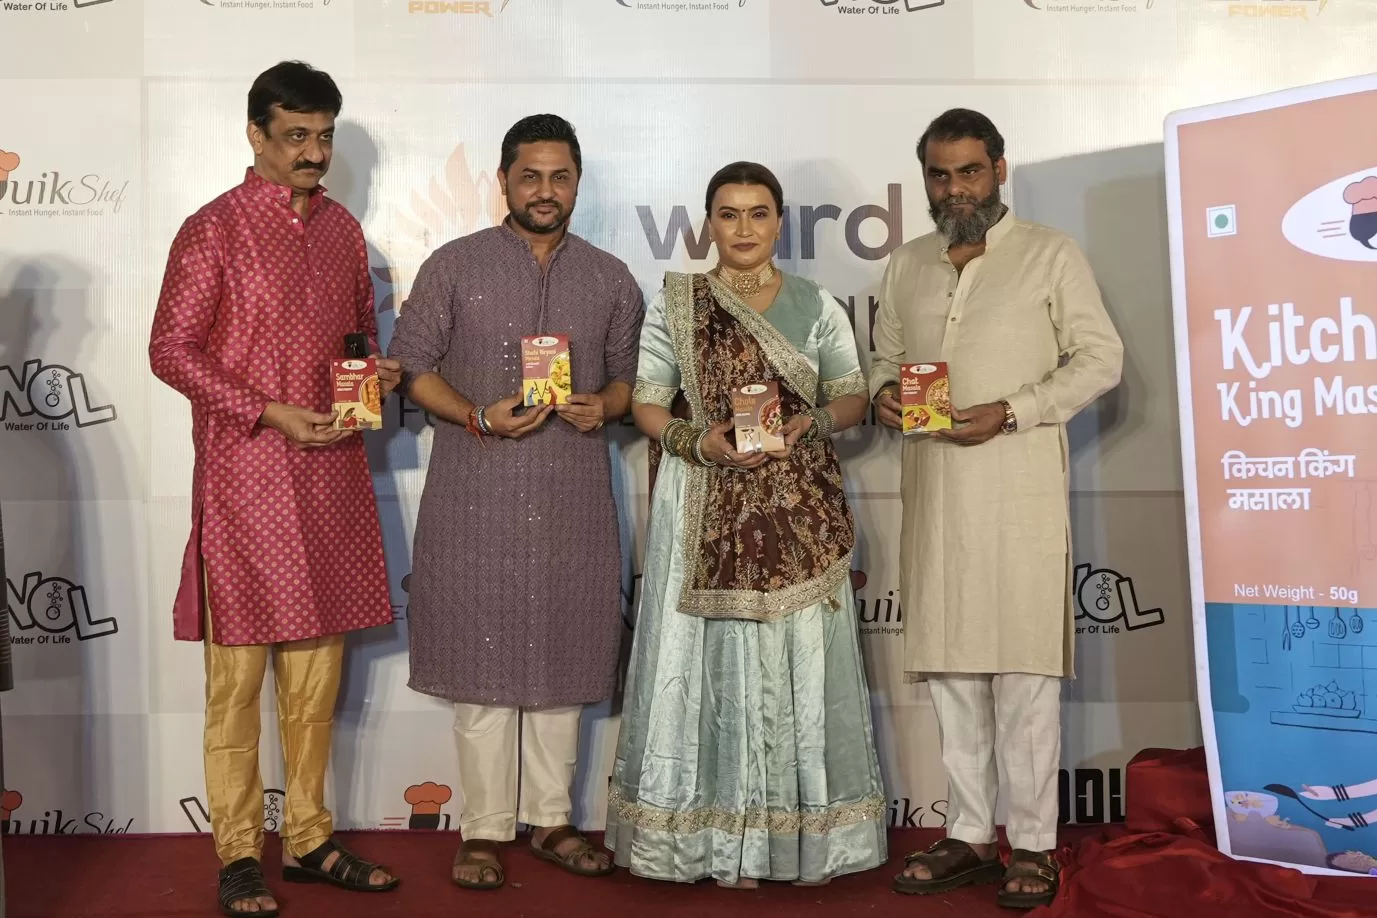 Wardwizard Foods and Beverages Ltd Launches QuikShef Spice Range During Navratri Festival.jpg